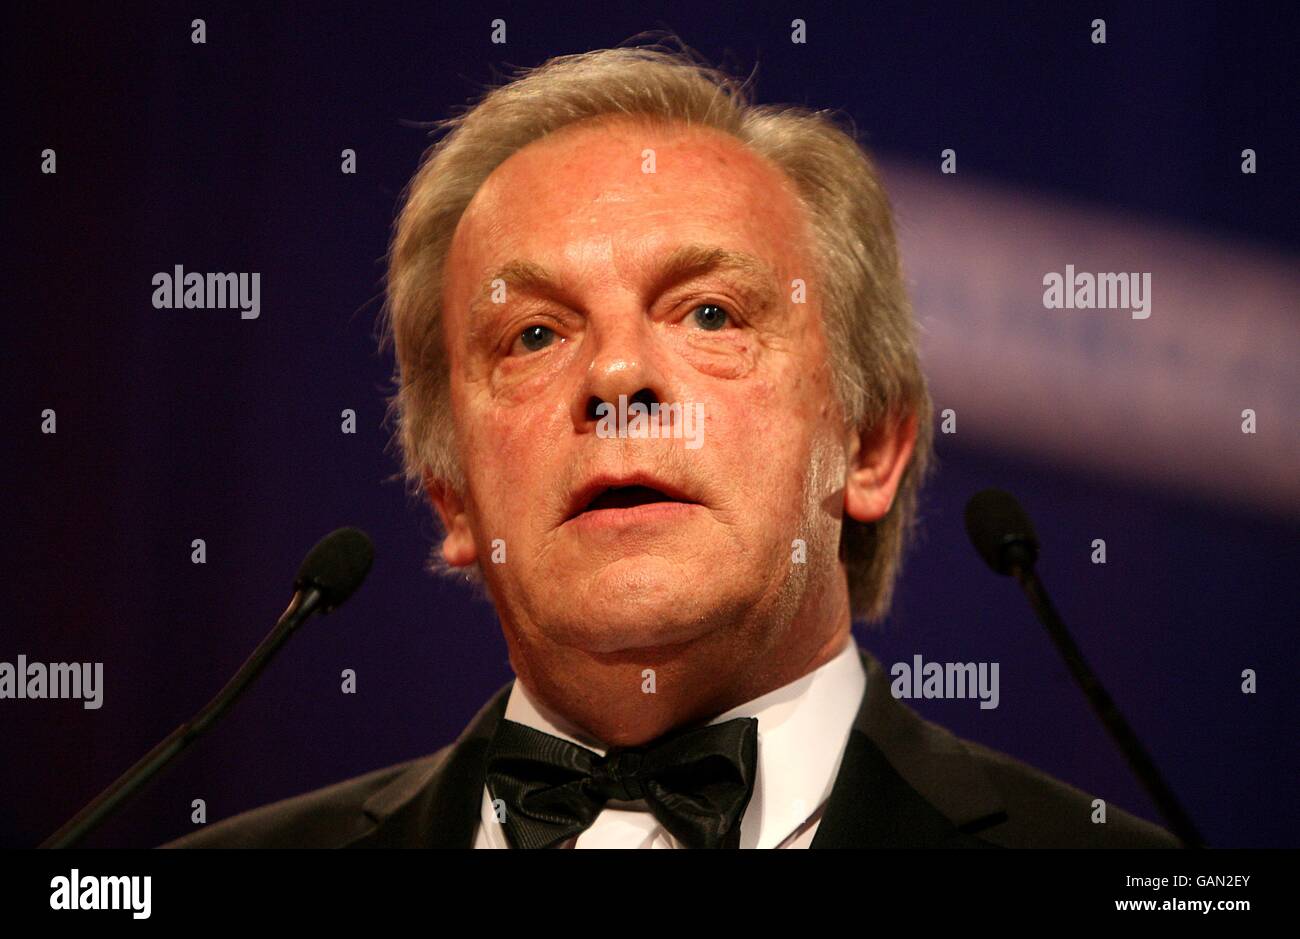 CEO of the PFA (Professional Footballers Association) Gordon Taylor at the PFA Player of the Year Awards 2008 at the Grosvenor House Hotel, London. Stock Photo